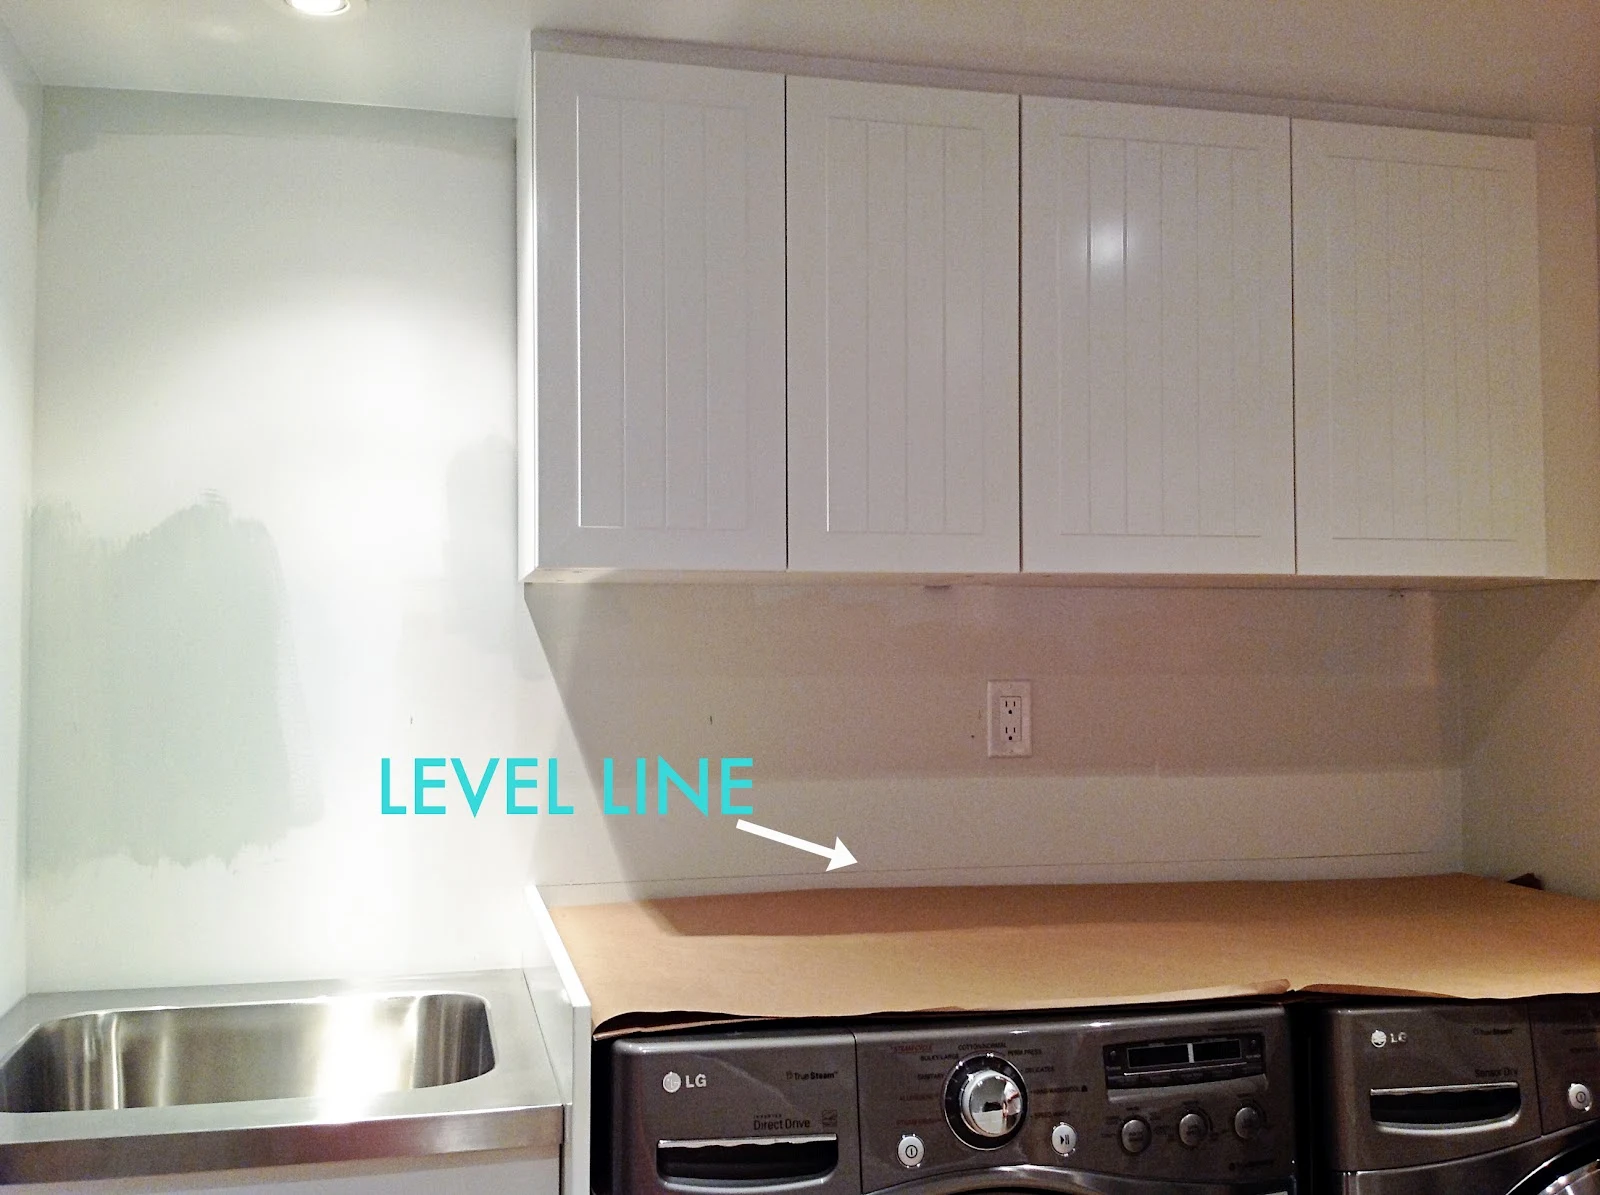 How To Install A Countertop Over A Washer And Dryer, DIY floating countertop in the laundry room, countertop cleat, counter over front load washer and dryer